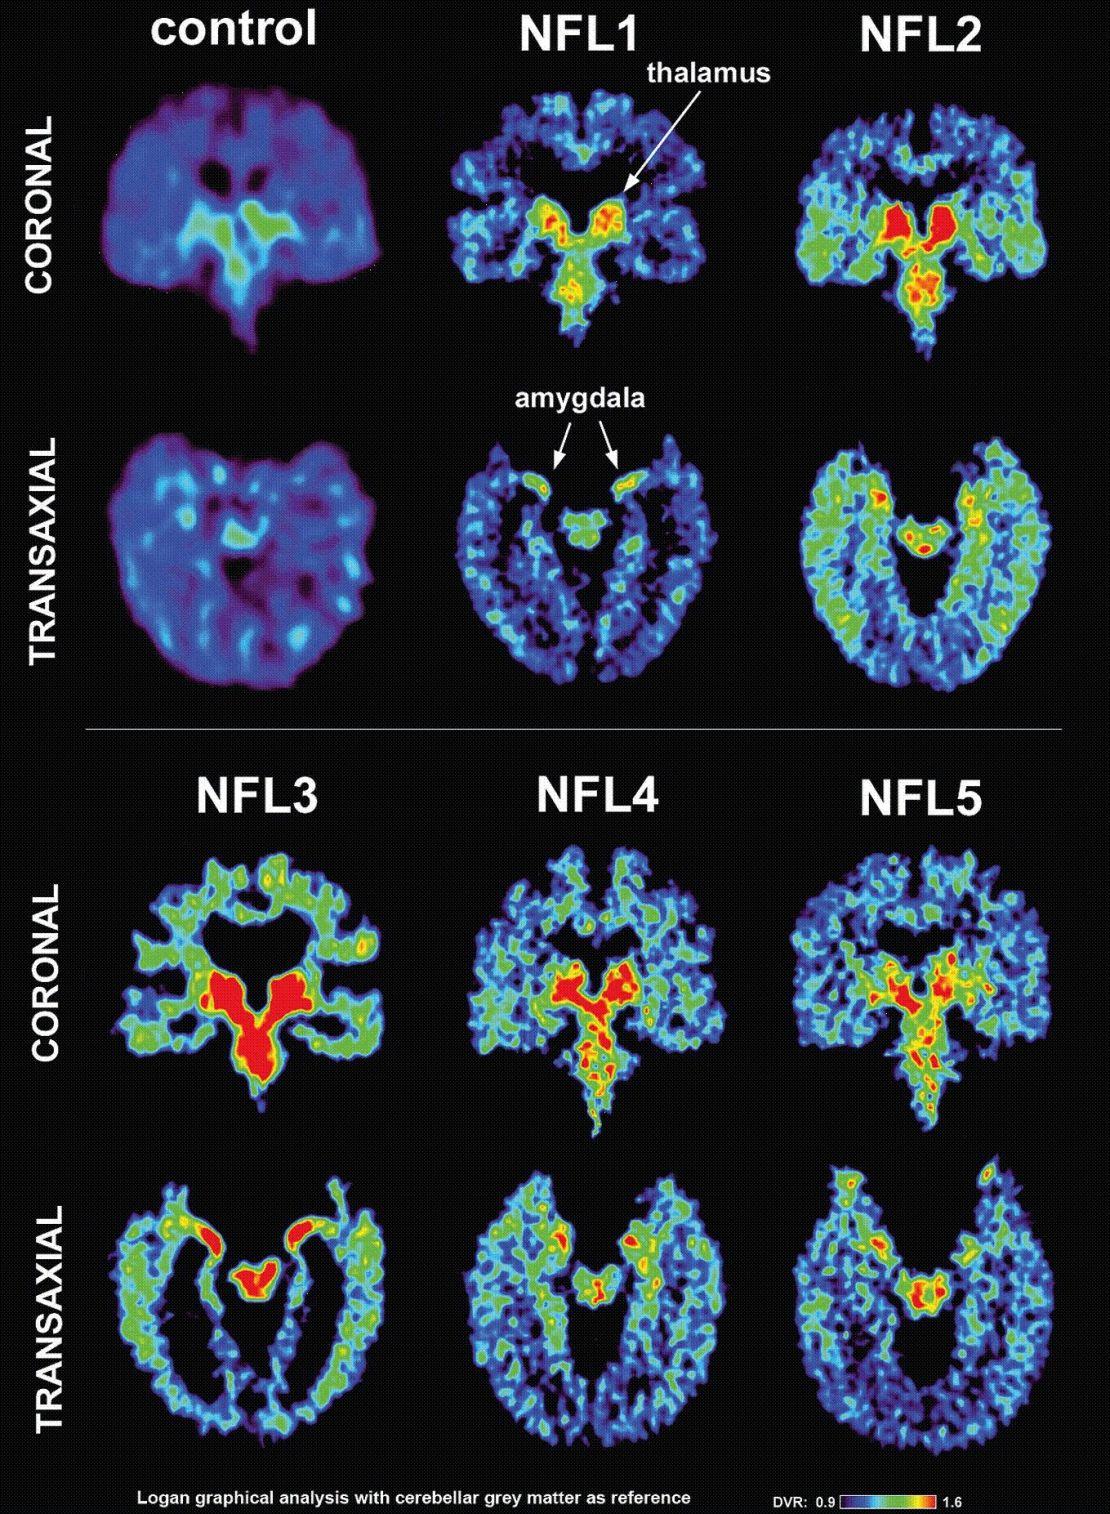 Players' brain scans 